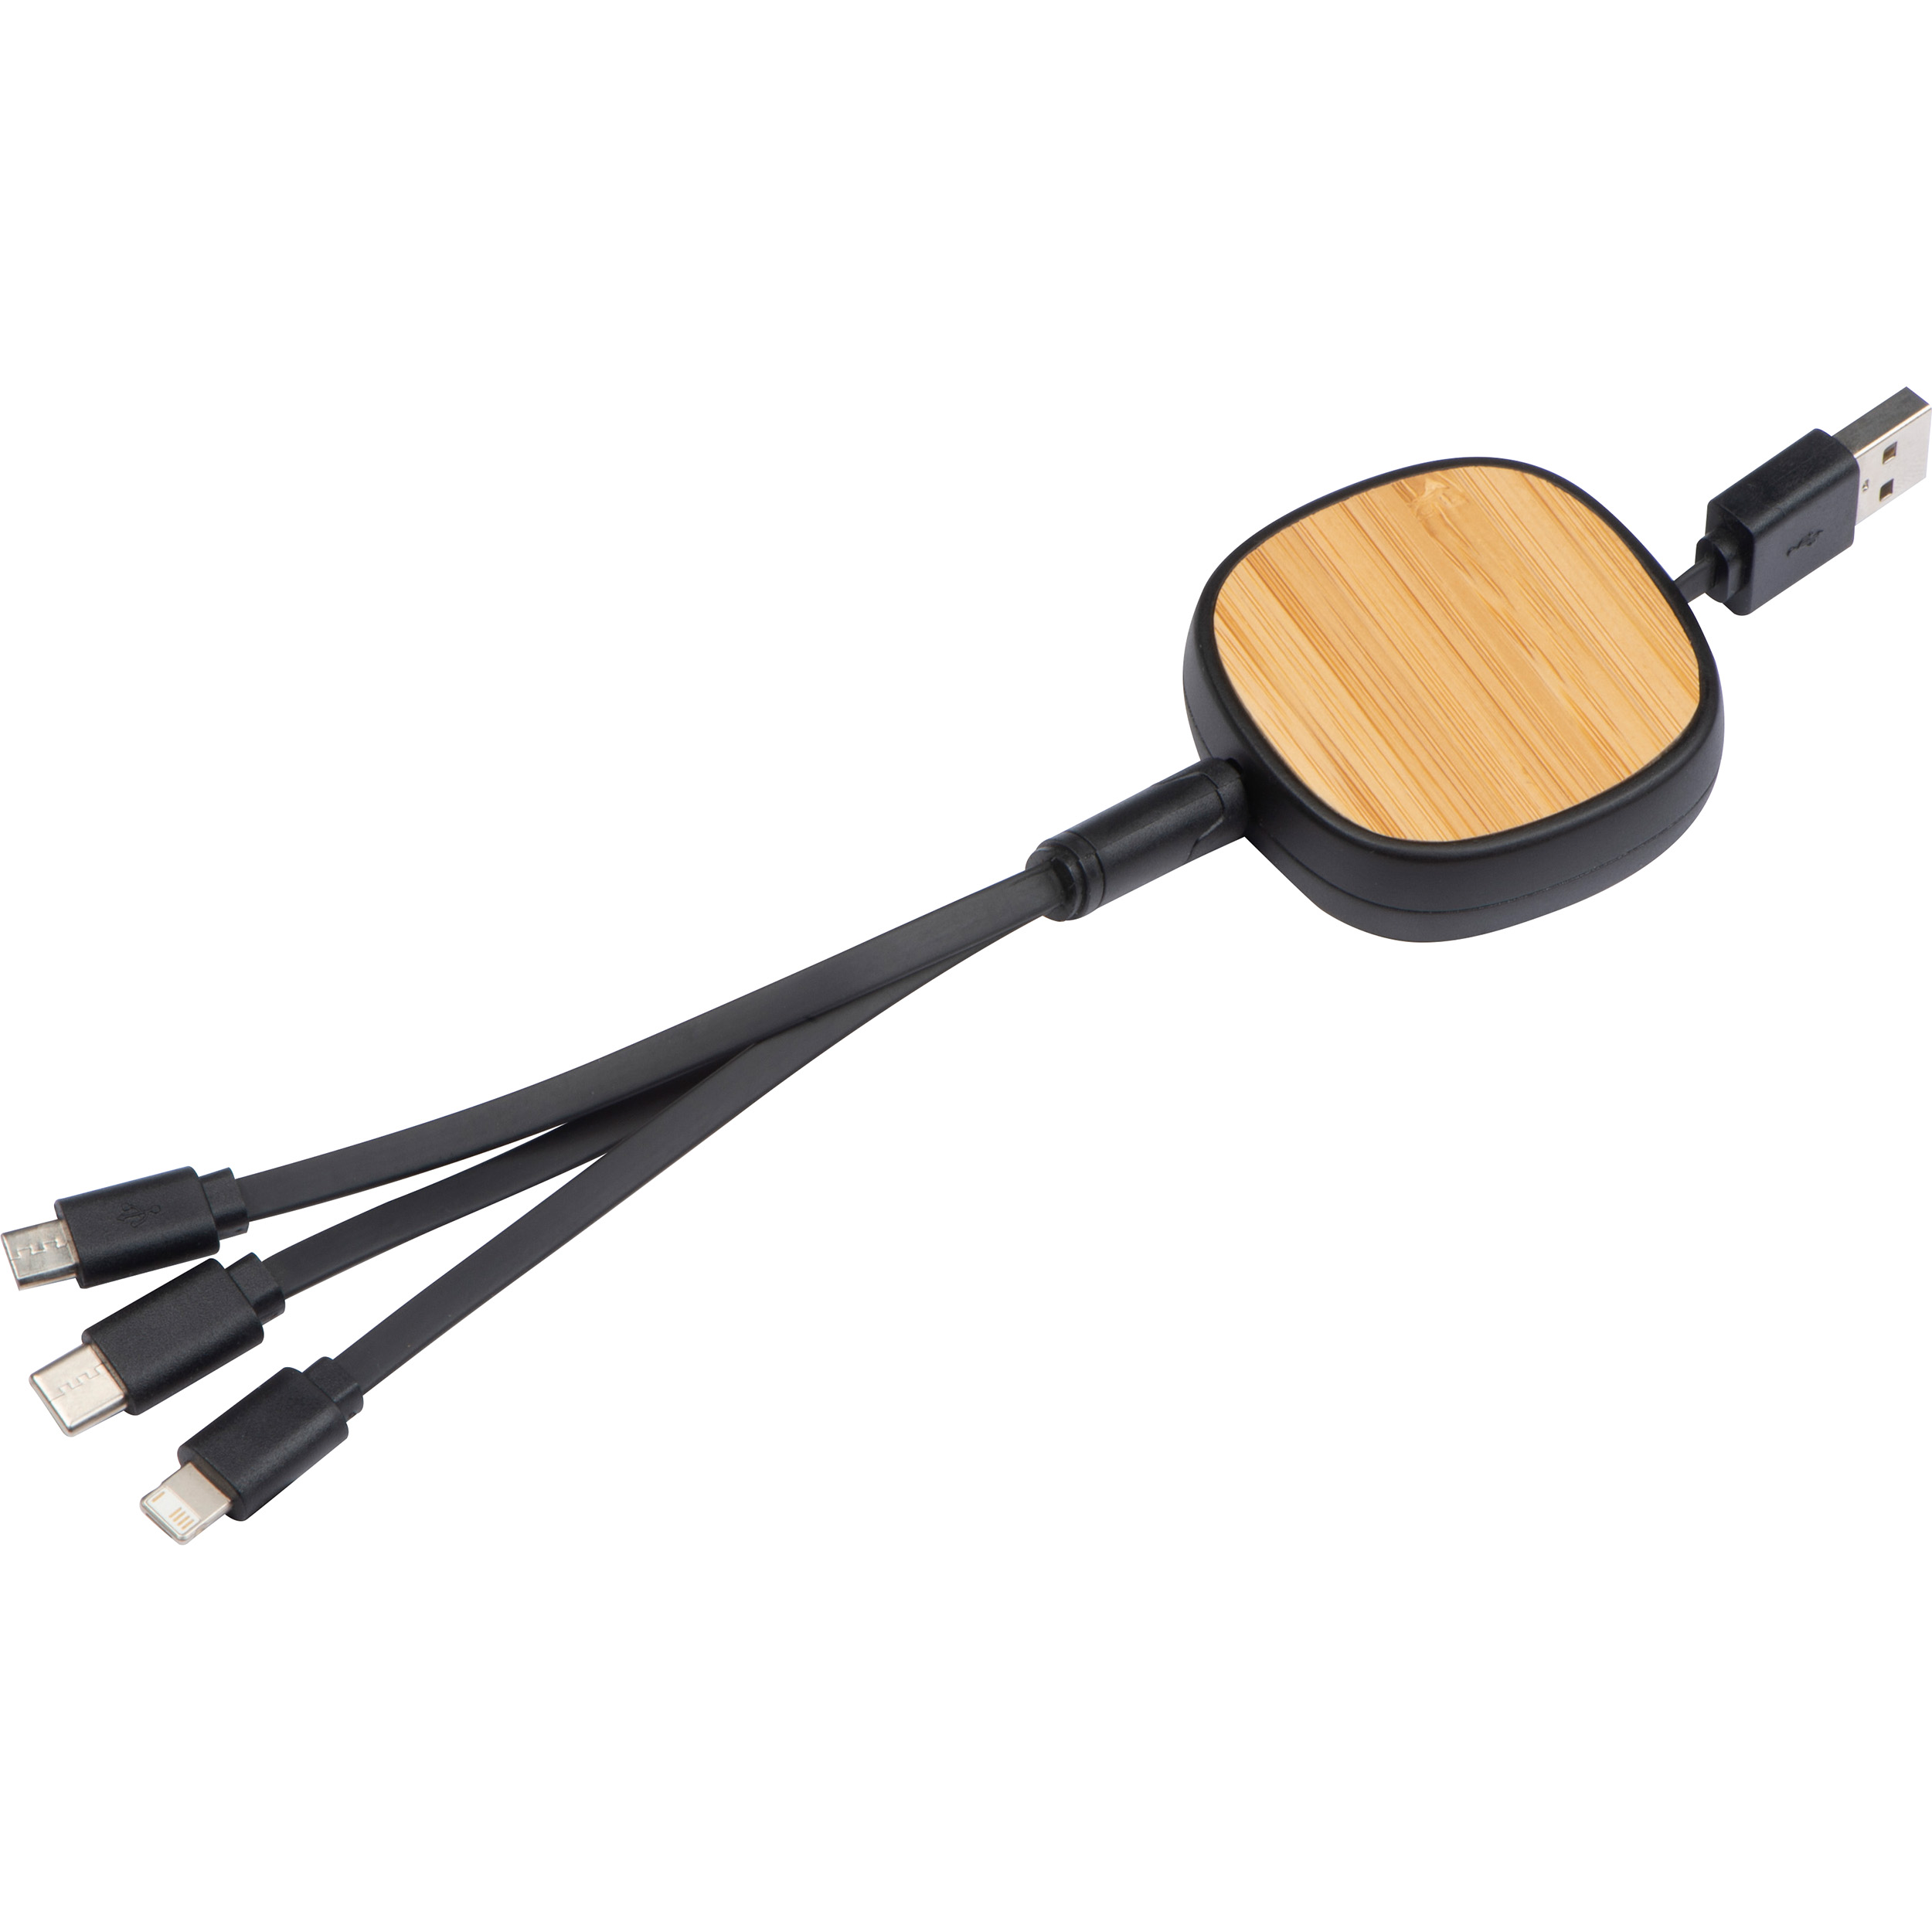 Charging cable with bamboo decoration